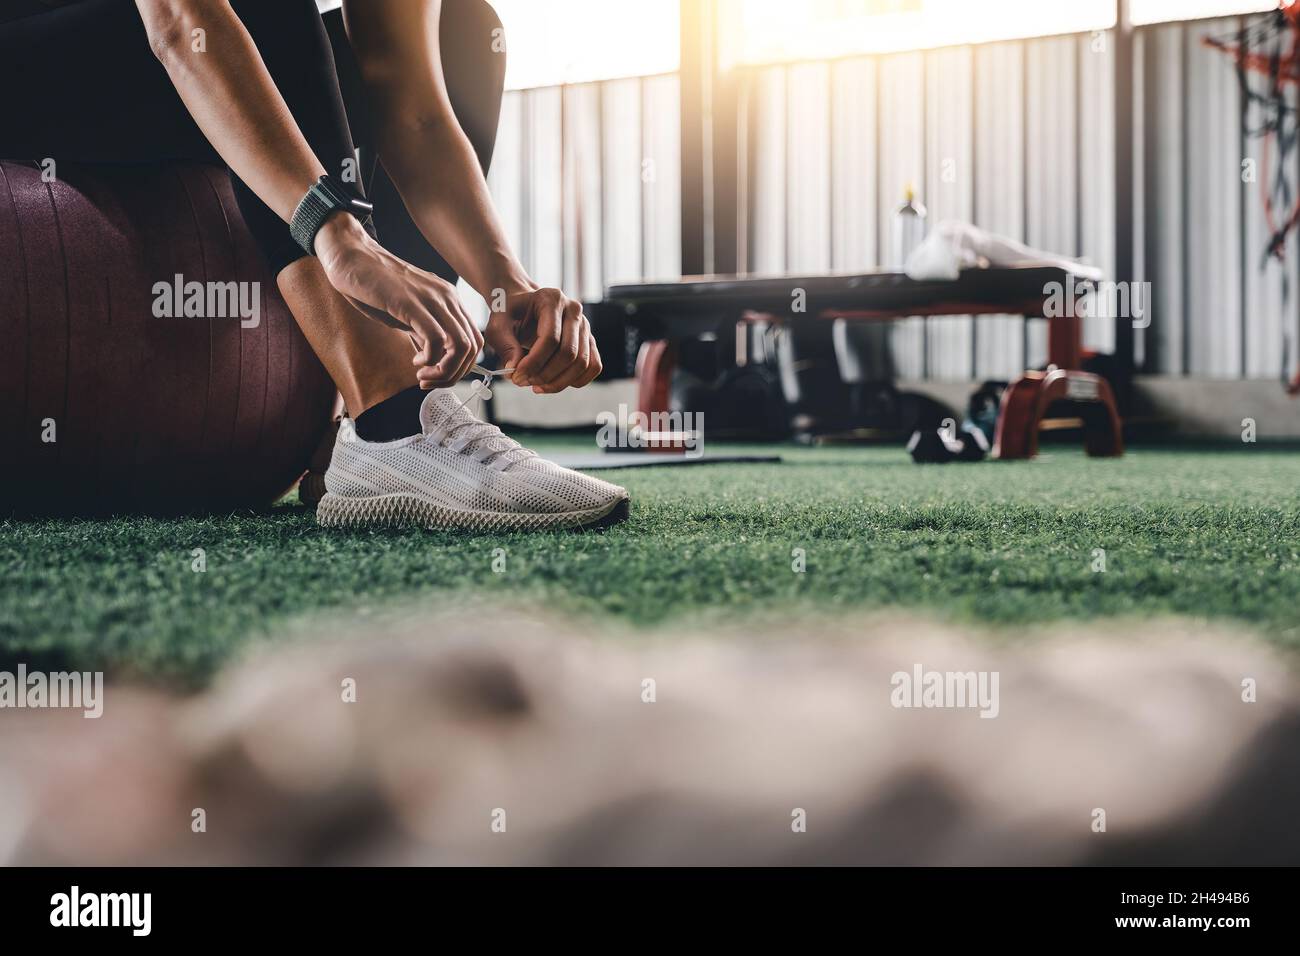 Woman sitting on gym ball tying shoelace and getting ready for fitness Stock Photo